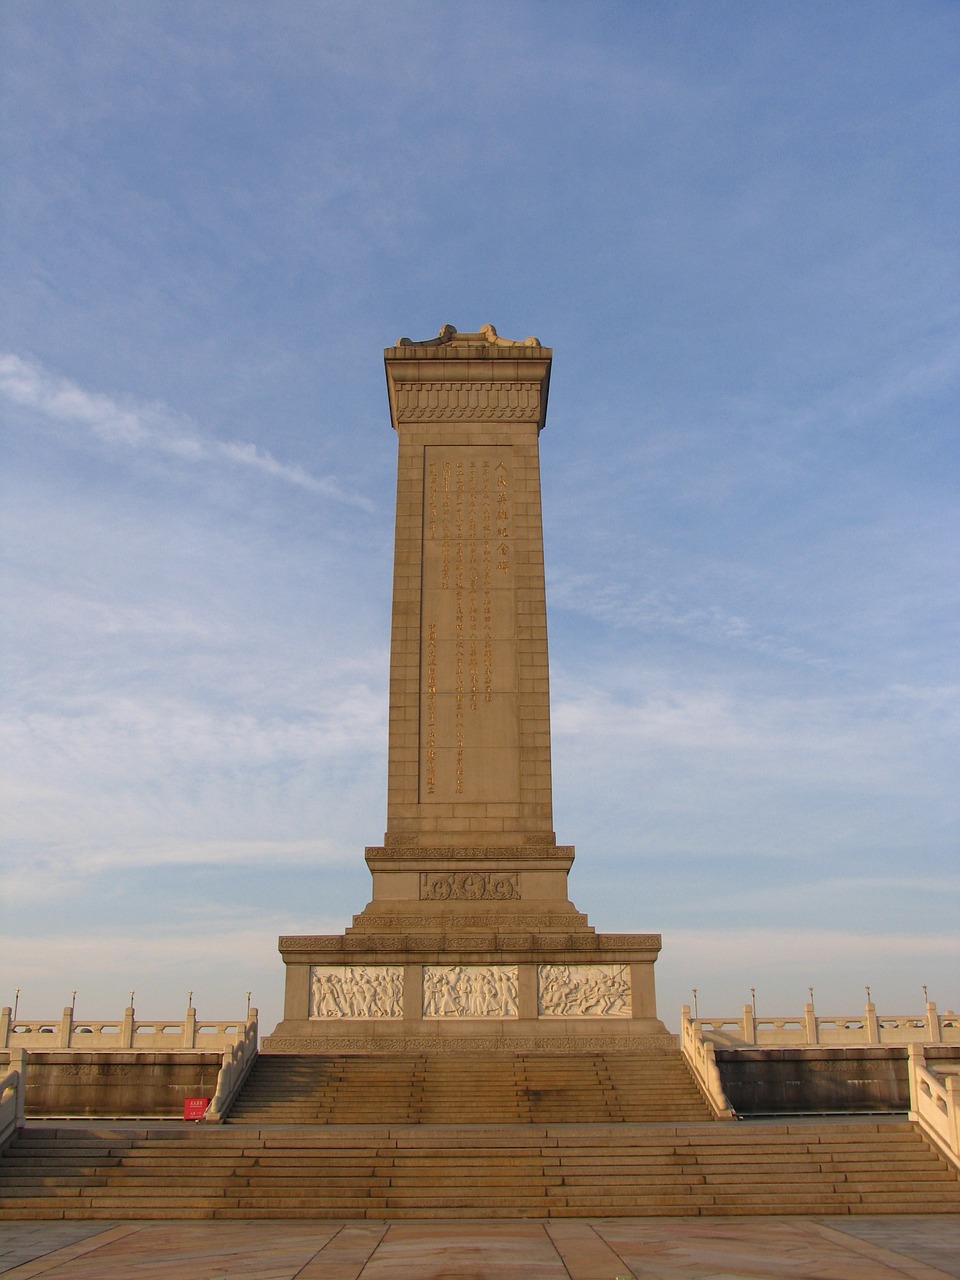 the monument to the tian an men square monument free photo